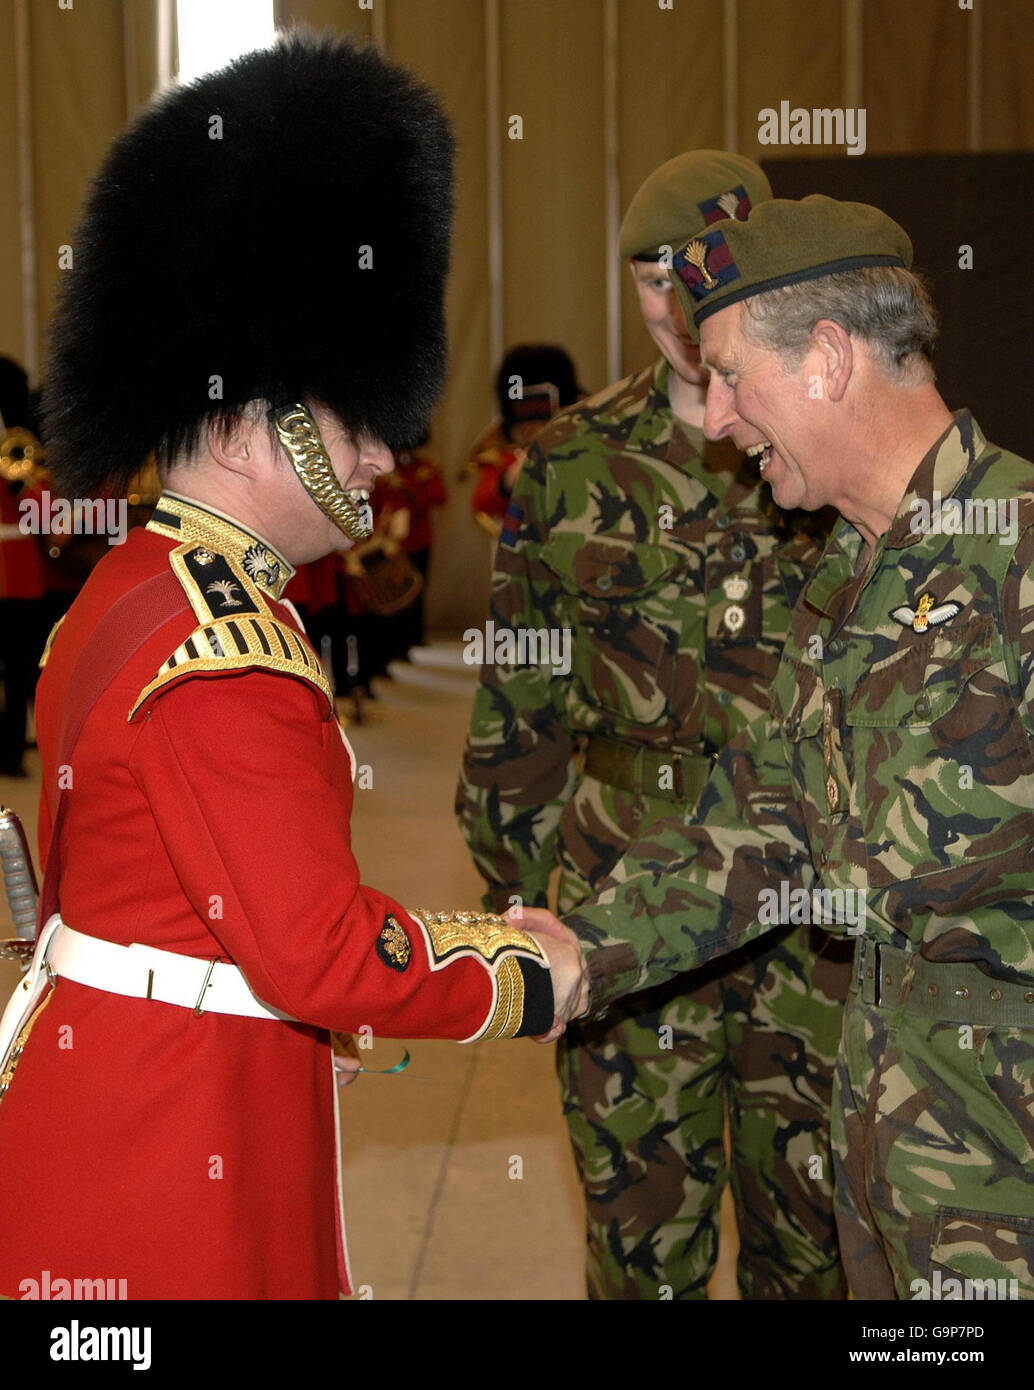 The Prince of Wales (right) shakes hands with the bandleader of the Welsh Guards after presenting him with a ceremonial leek, marking St David's Day, at the Banja Luka Metal Factory in Bosnia. Stock Photo